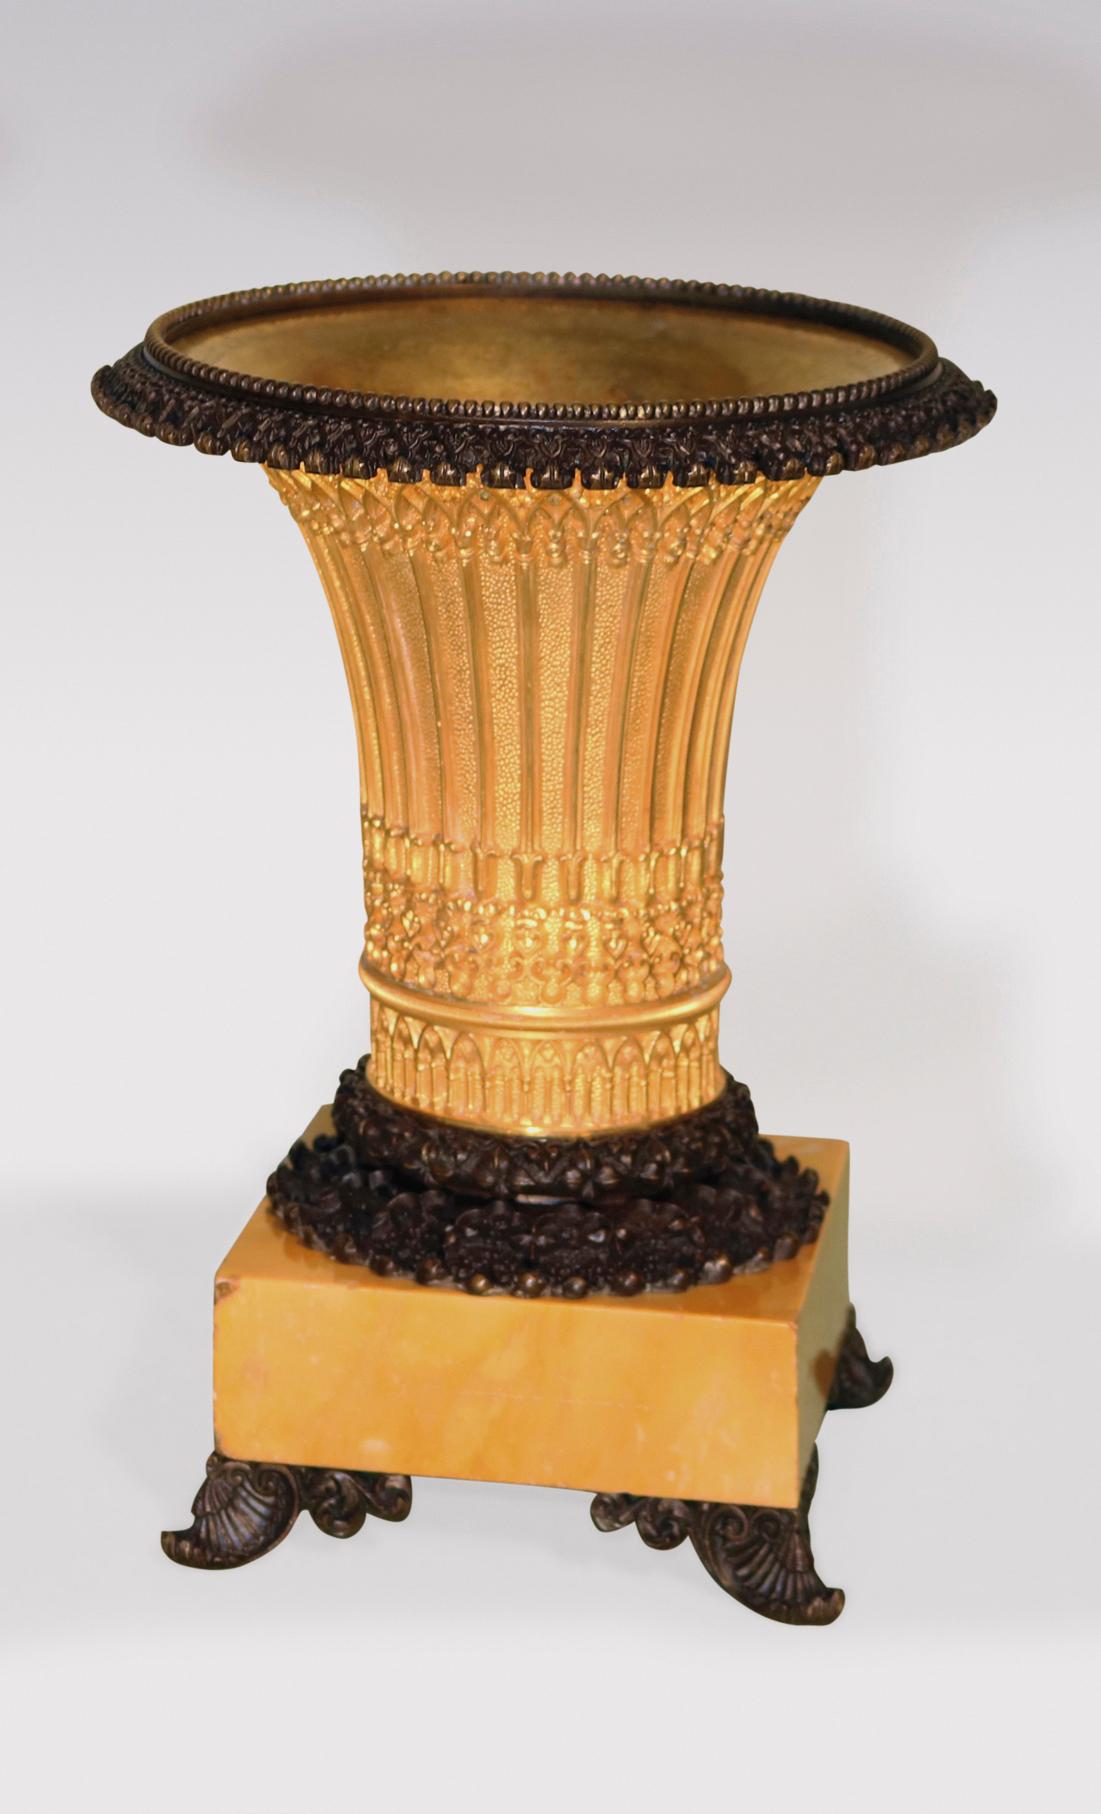 A fine pair of early 19th century bronze and ormolu Gothic style vase-shaped Tazzas, having beaded and berry decorated edges, above intricate arch decorated bodies, supported on sienna marble bases, ending on scrolled feet.